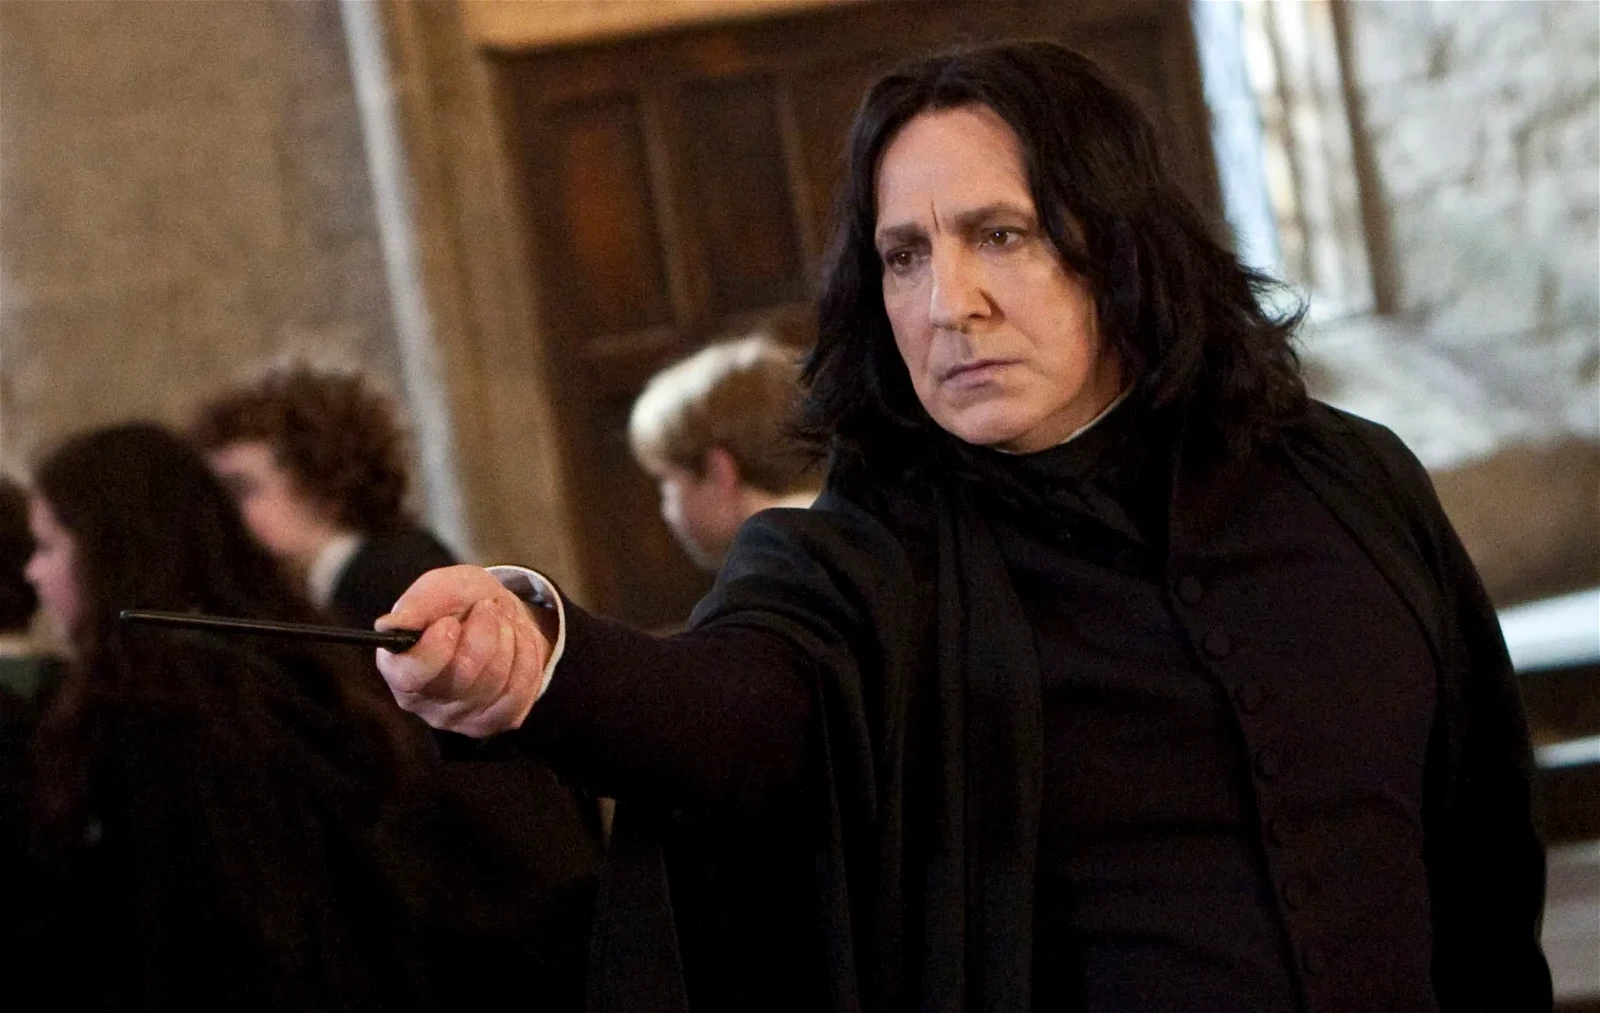 After Roth's refusal, the role went to Alan Rickman